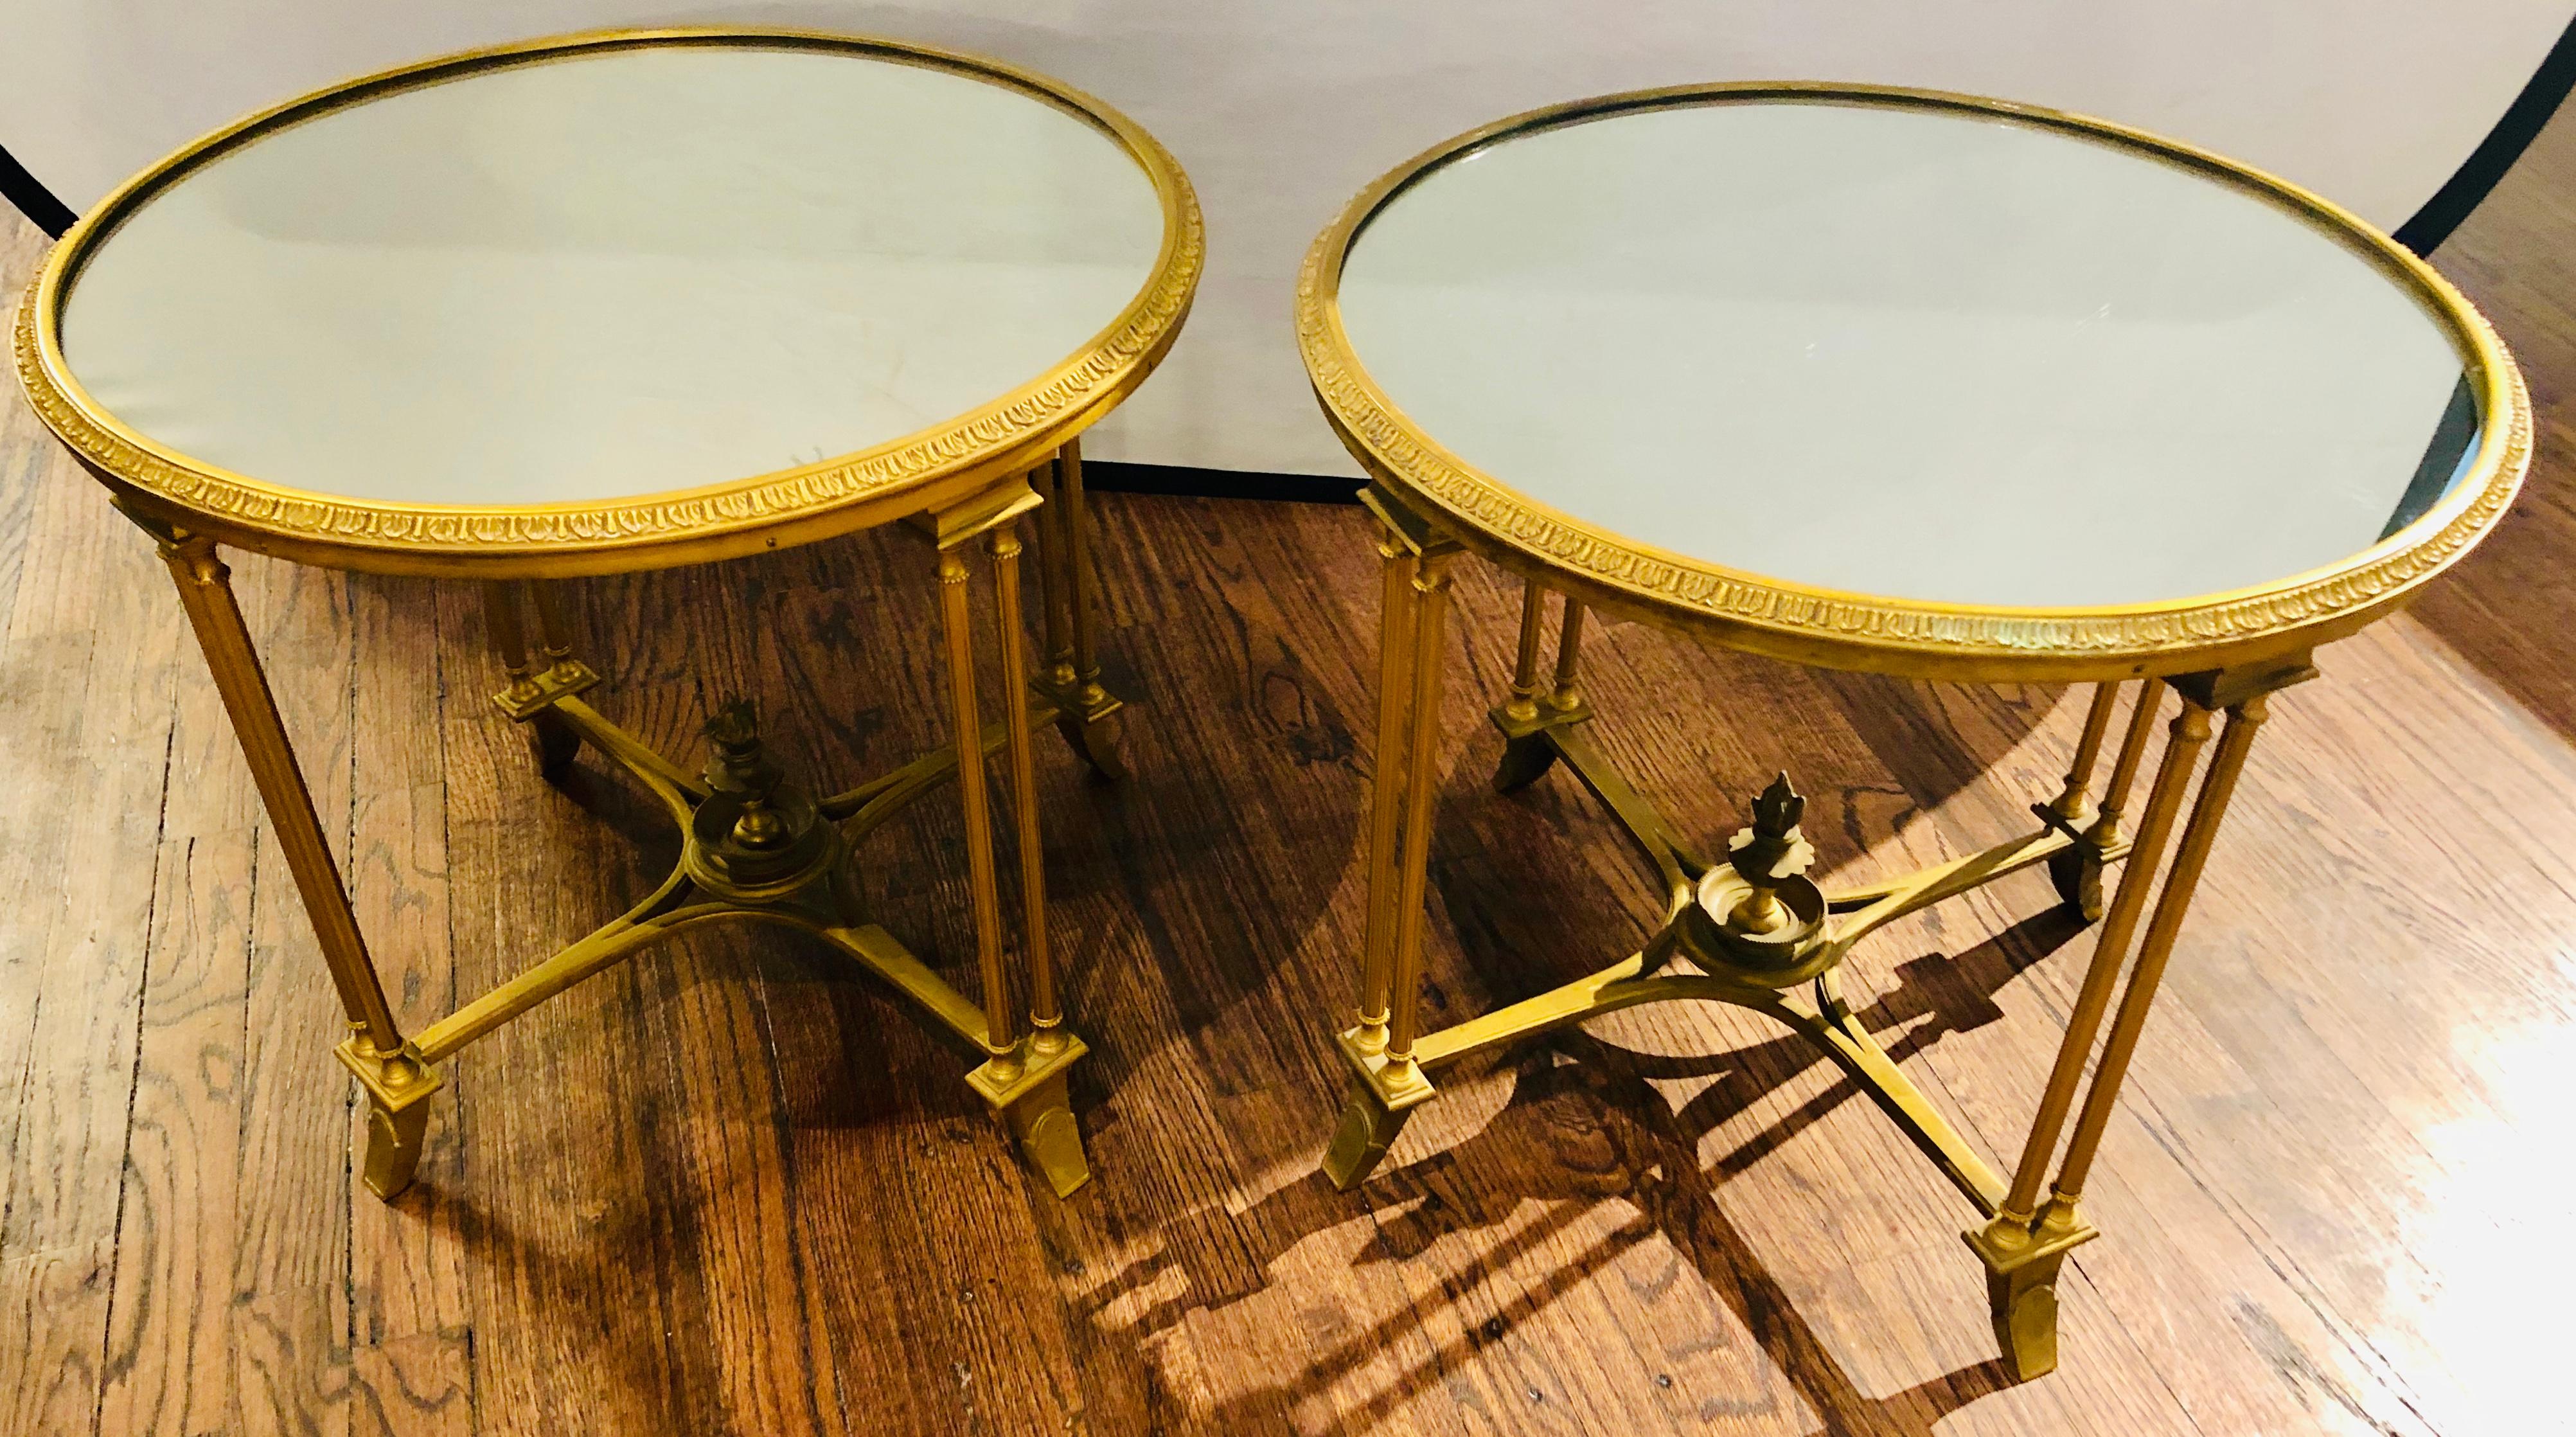 Maison Bagués Attribution, Side Tables, Bronze, Mirrored Glass, France, 1930s For Sale 2